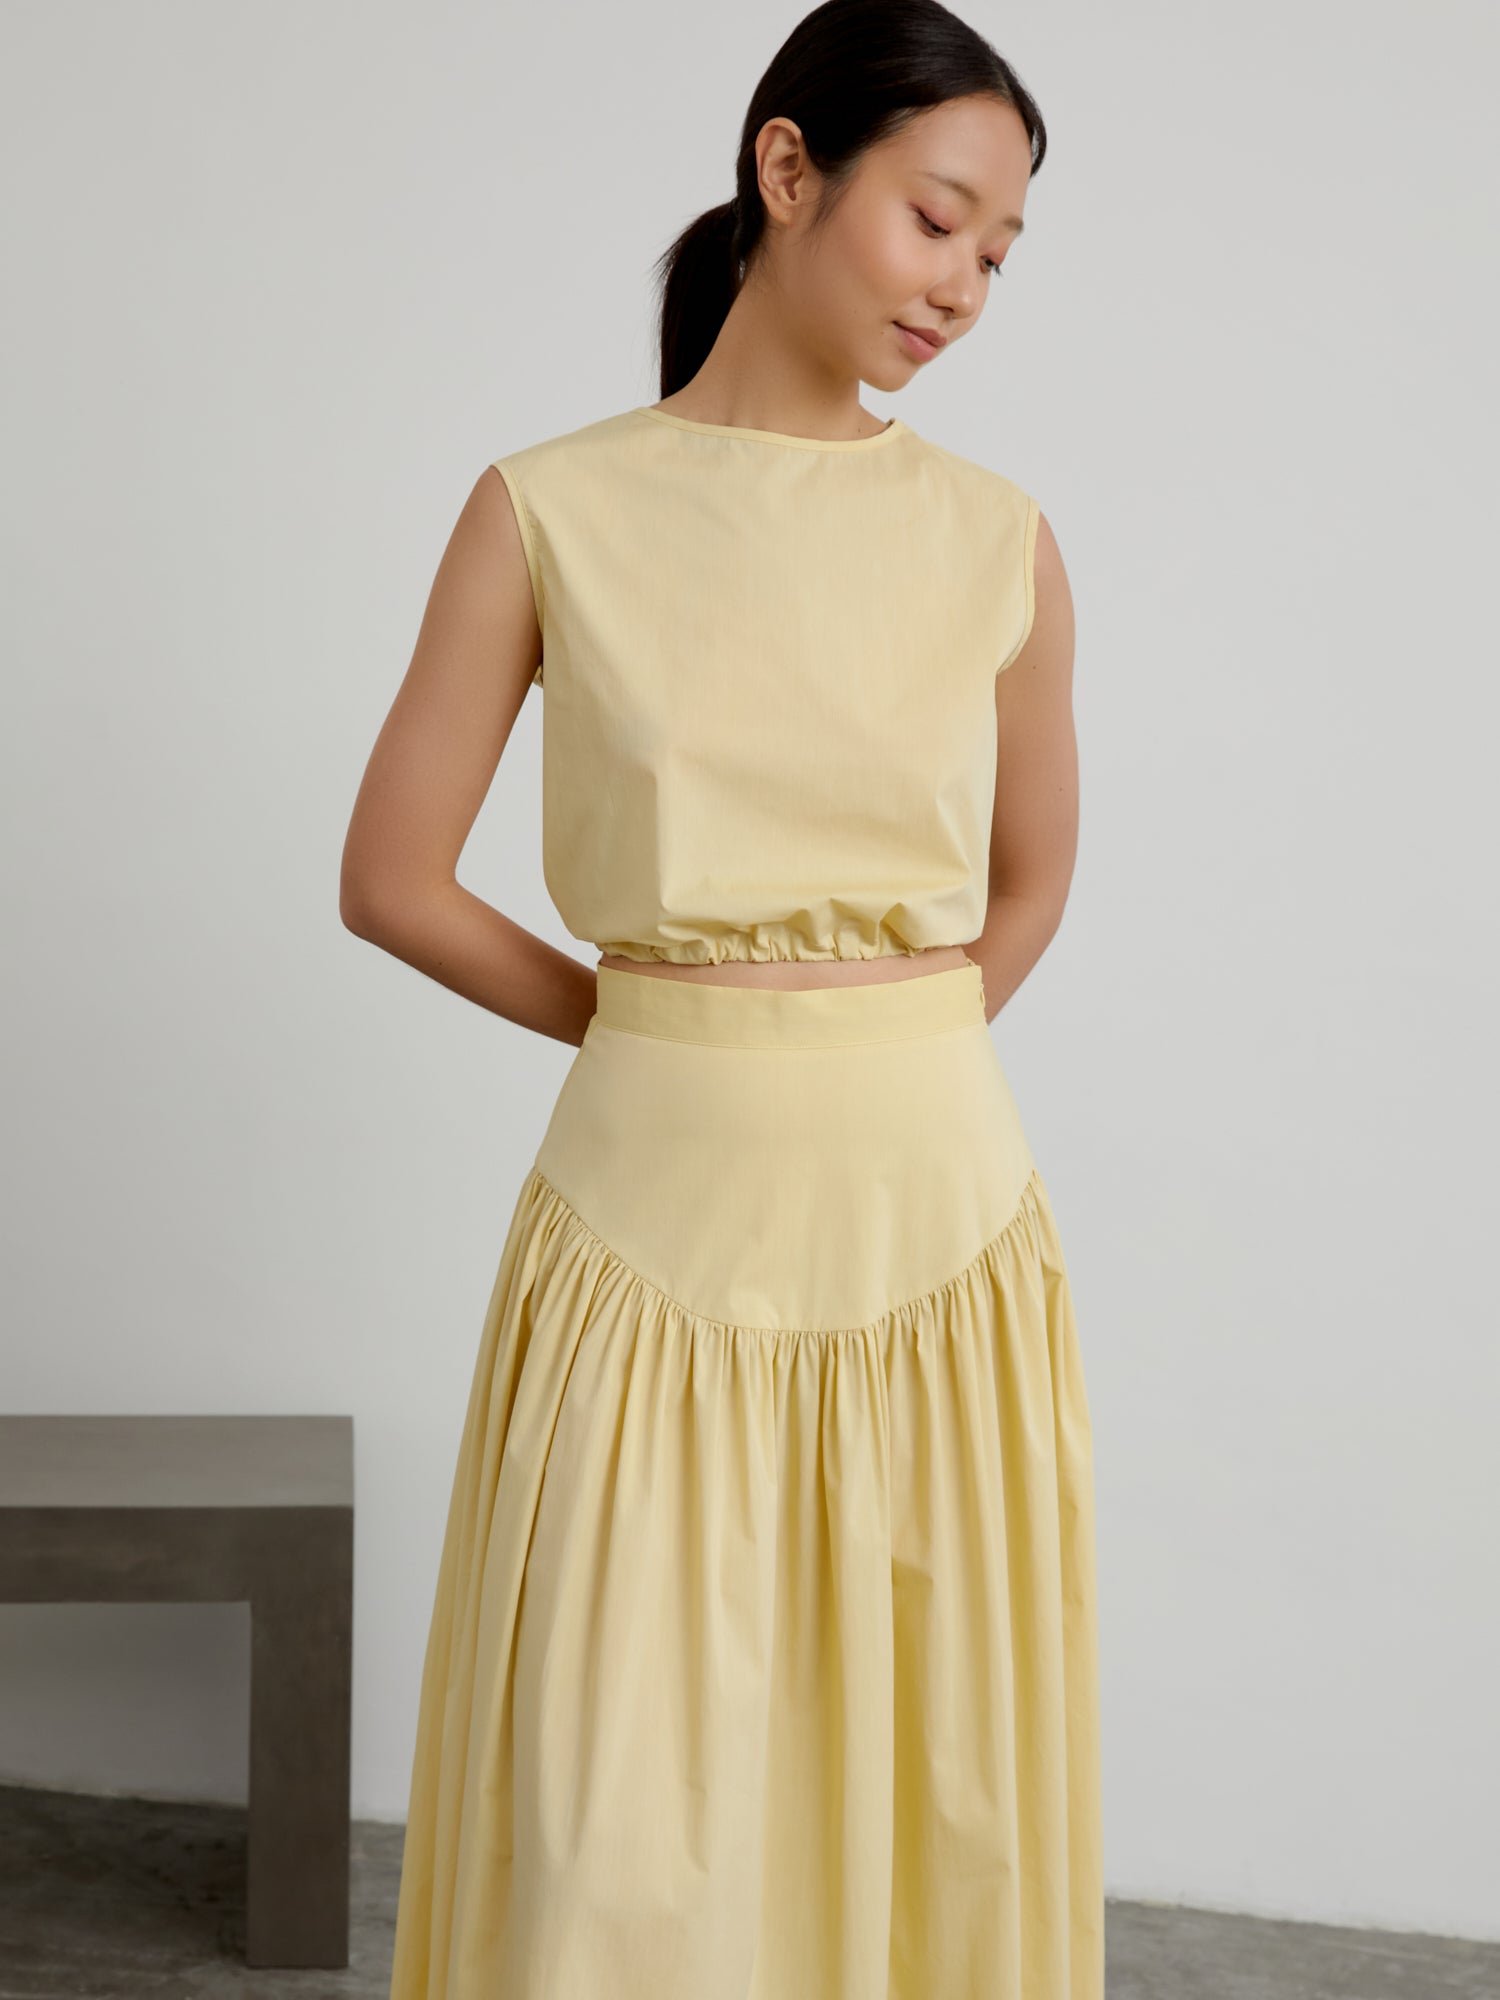 Flower Stitch Mesh Tulle Midi Skirt in Light Yellow - Retro, Indie and  Unique Fashion